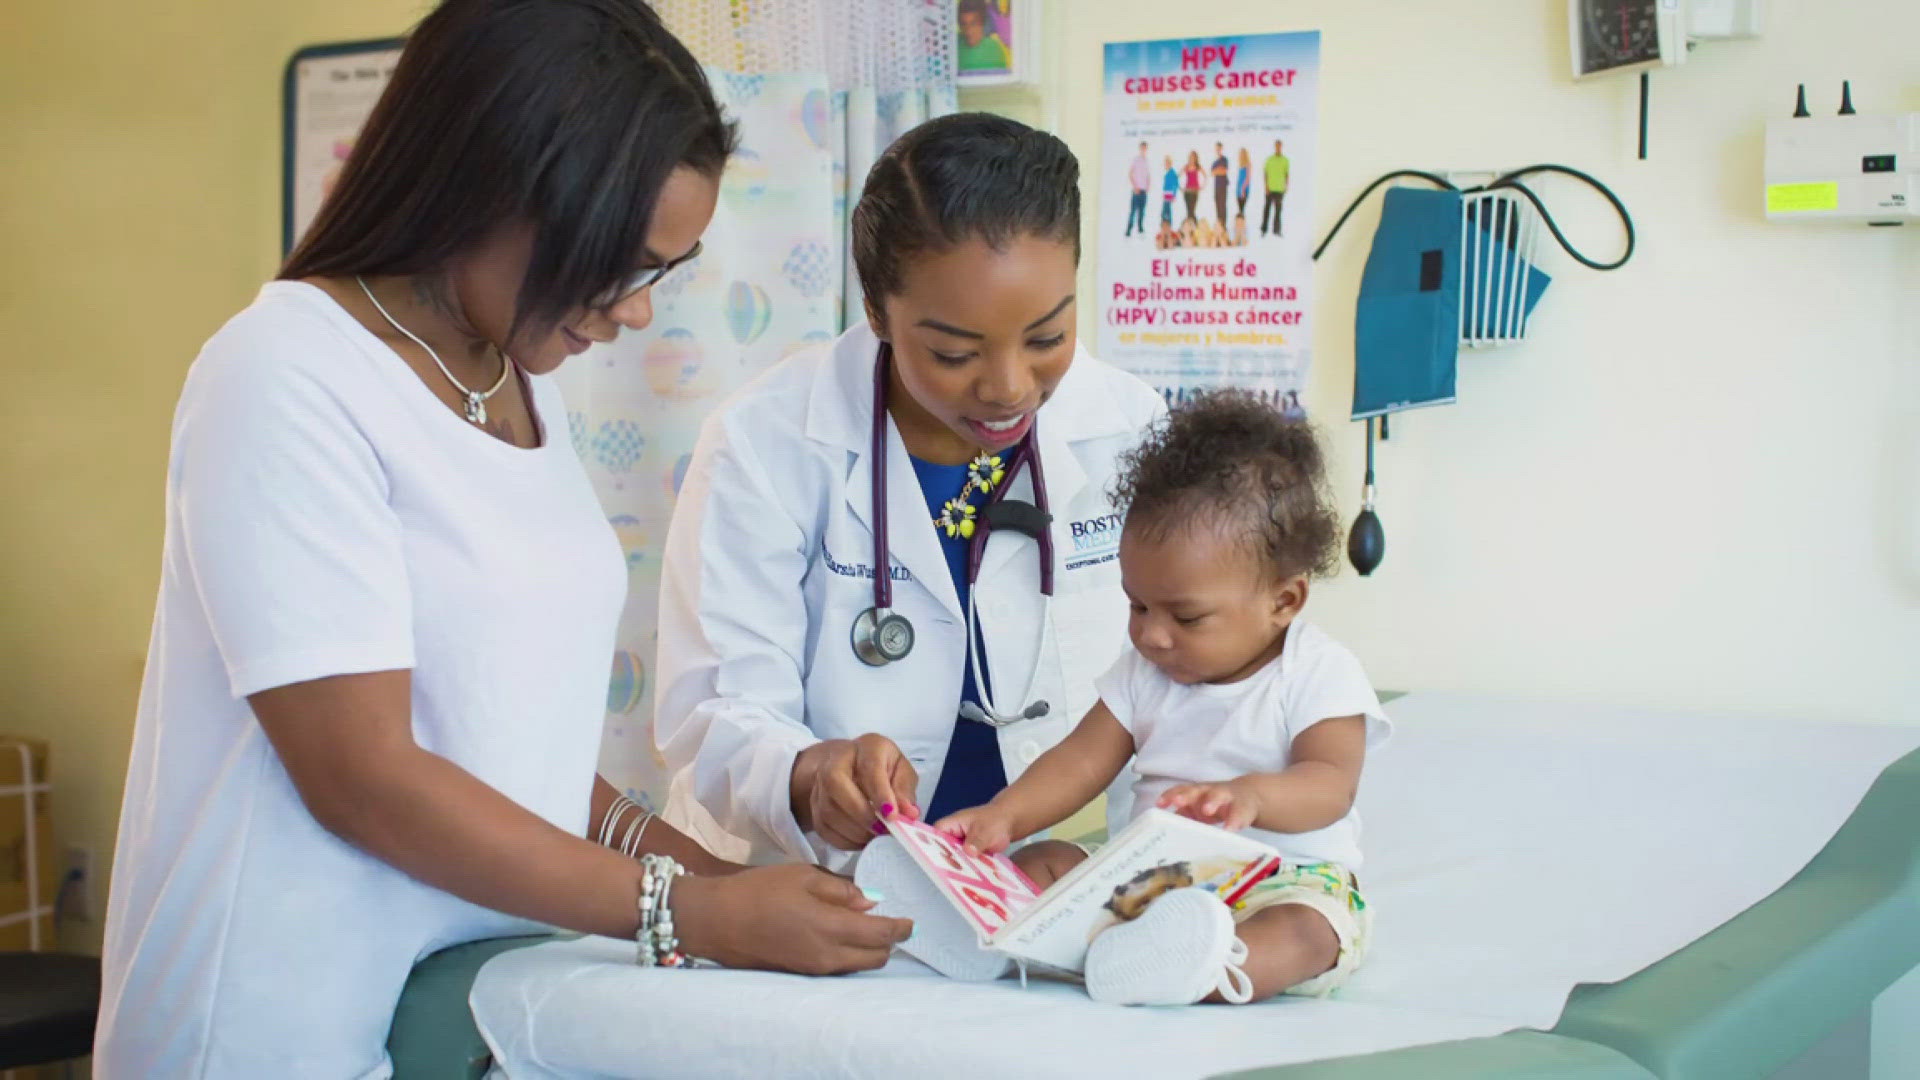 This week's micro-giving campaign supports Reach Out and Read. The nonprofit helps train pediatricians to talk to parents about the importance of reading.